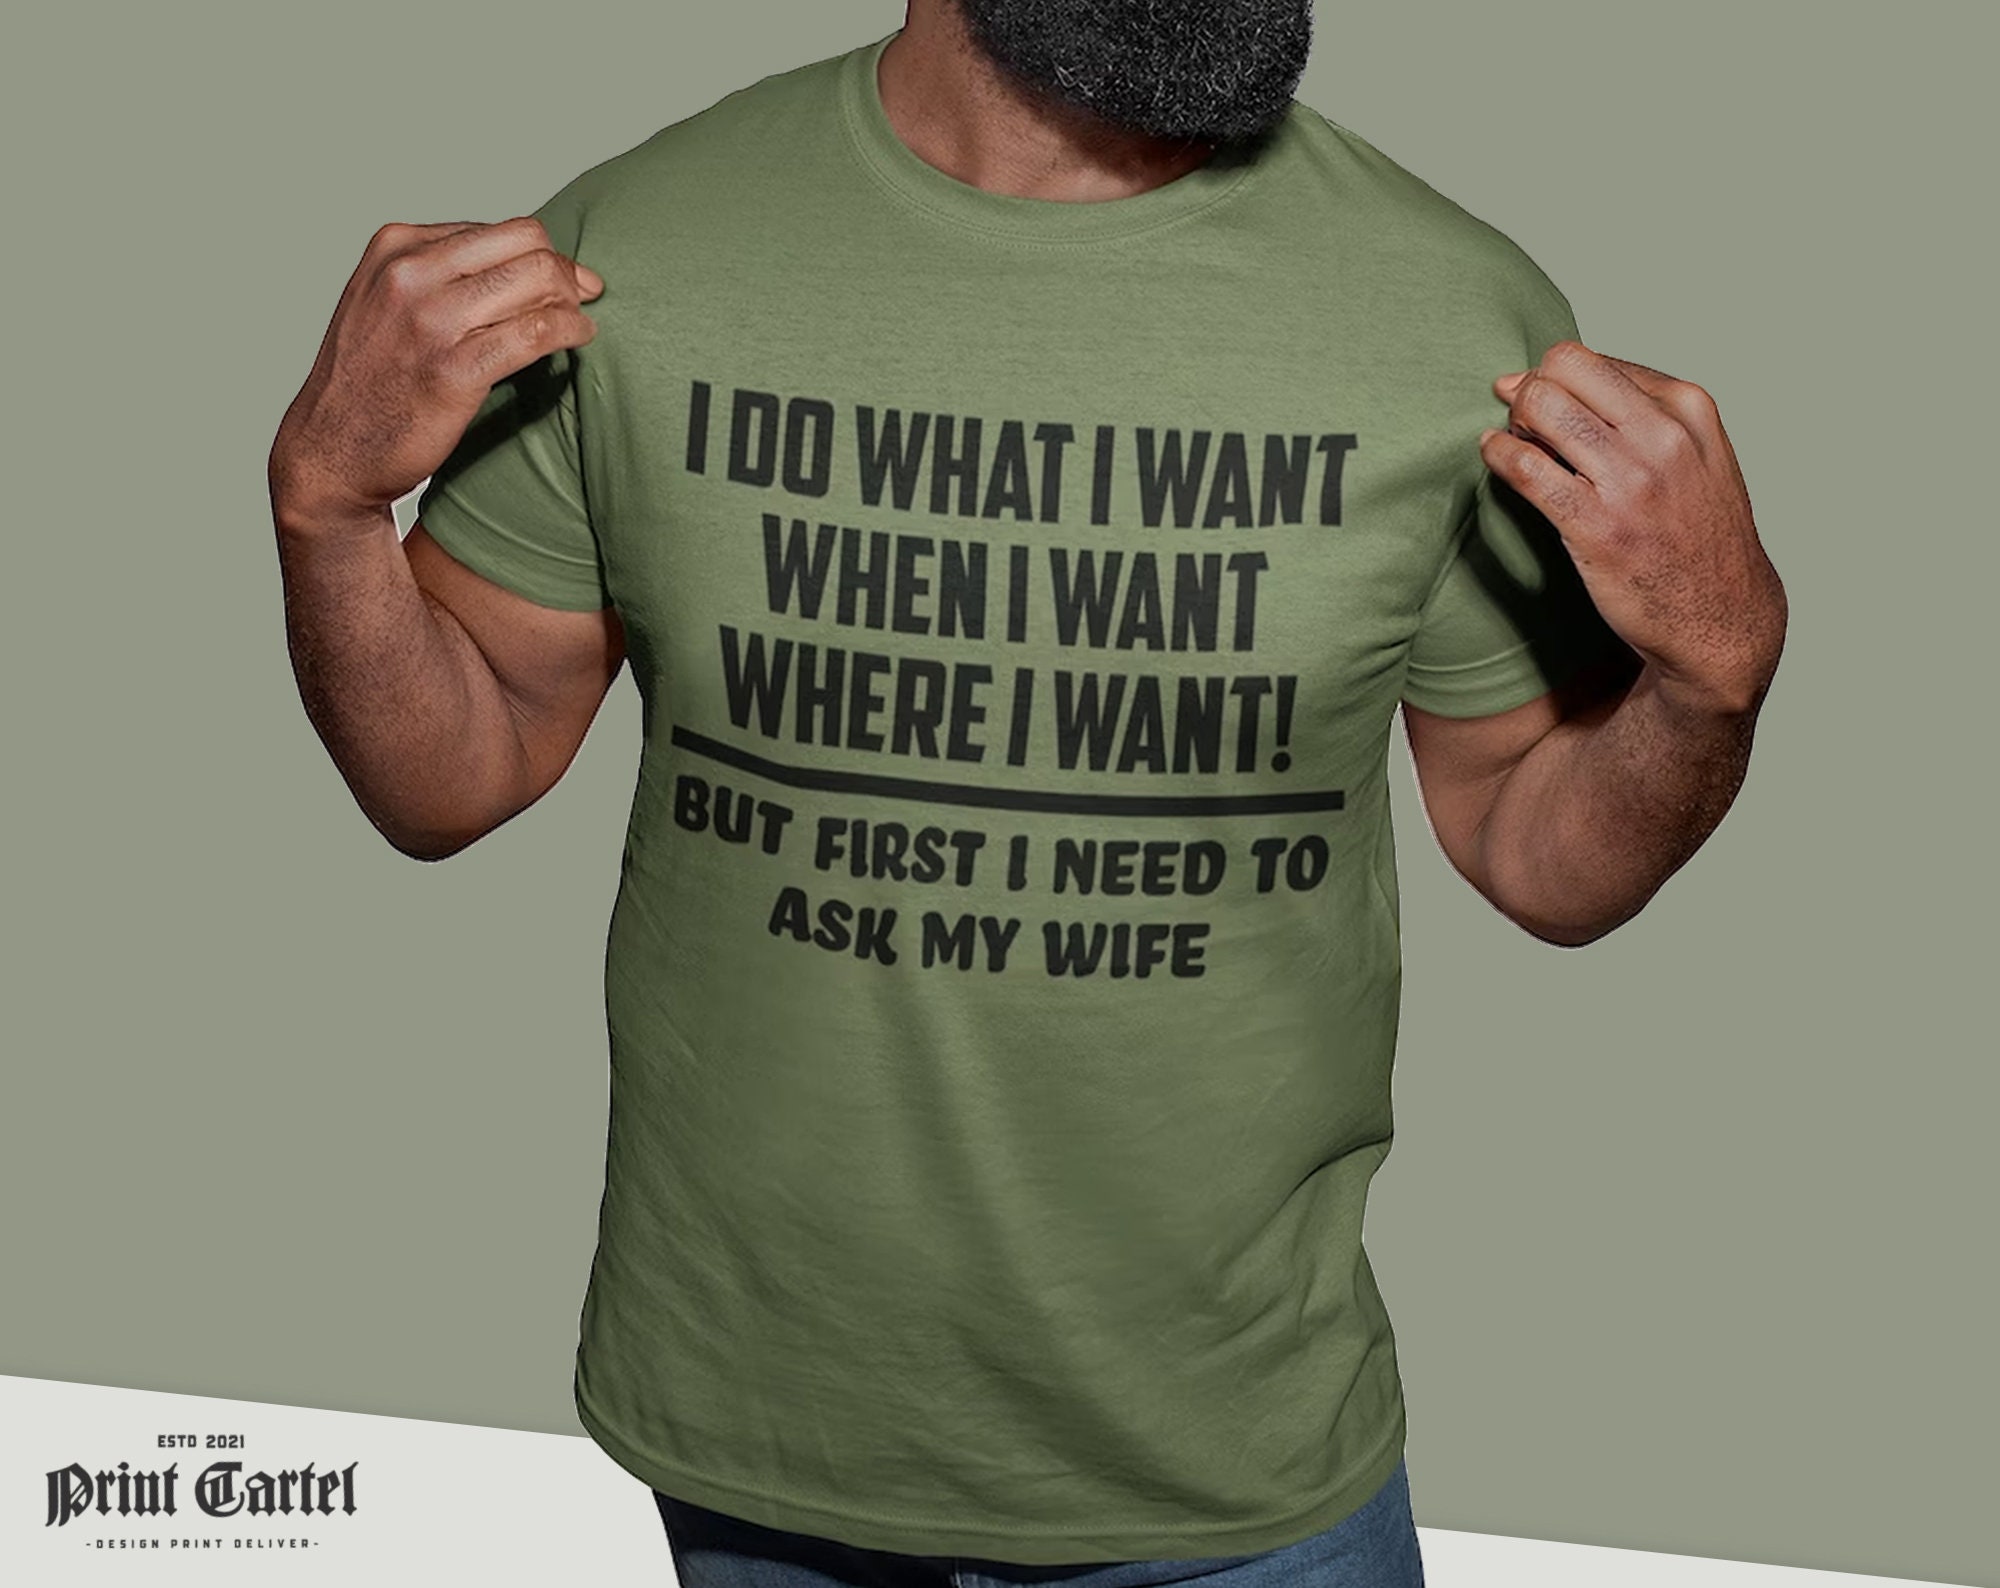 Funny T Shirts For Men I Do What Want, Gift From Wife, Wifey Gifts Husband, Husband Shirt Novelty Gift, Wedding Anniversary Tee Top